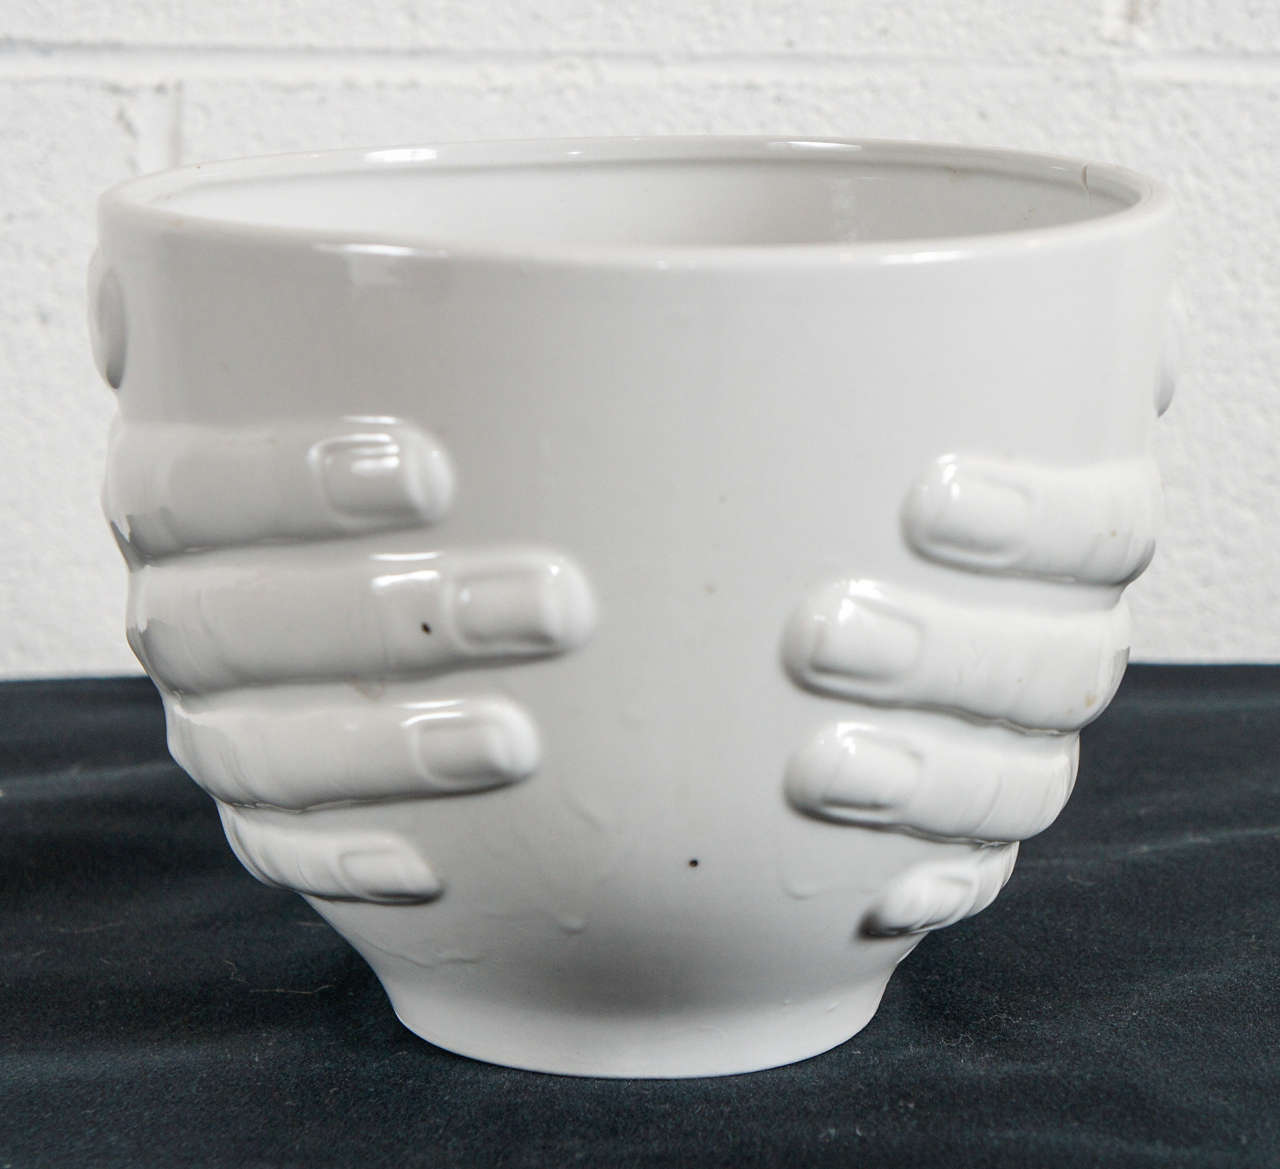 Here is a porcelain bowl held by two hands.